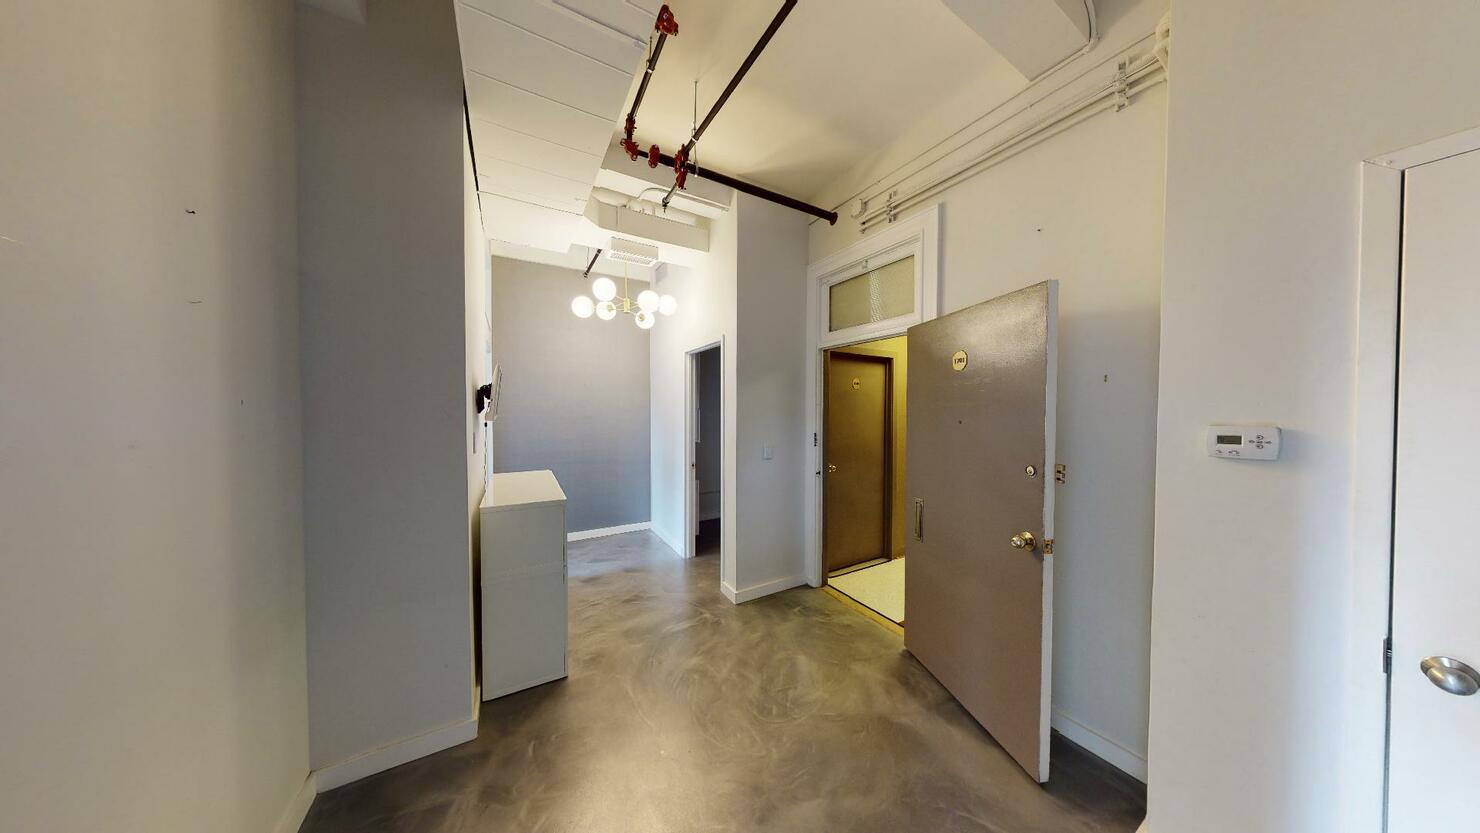 Sublet office for lease at 501 Fifth Avenue near Grand Central, featuring two office rooms.